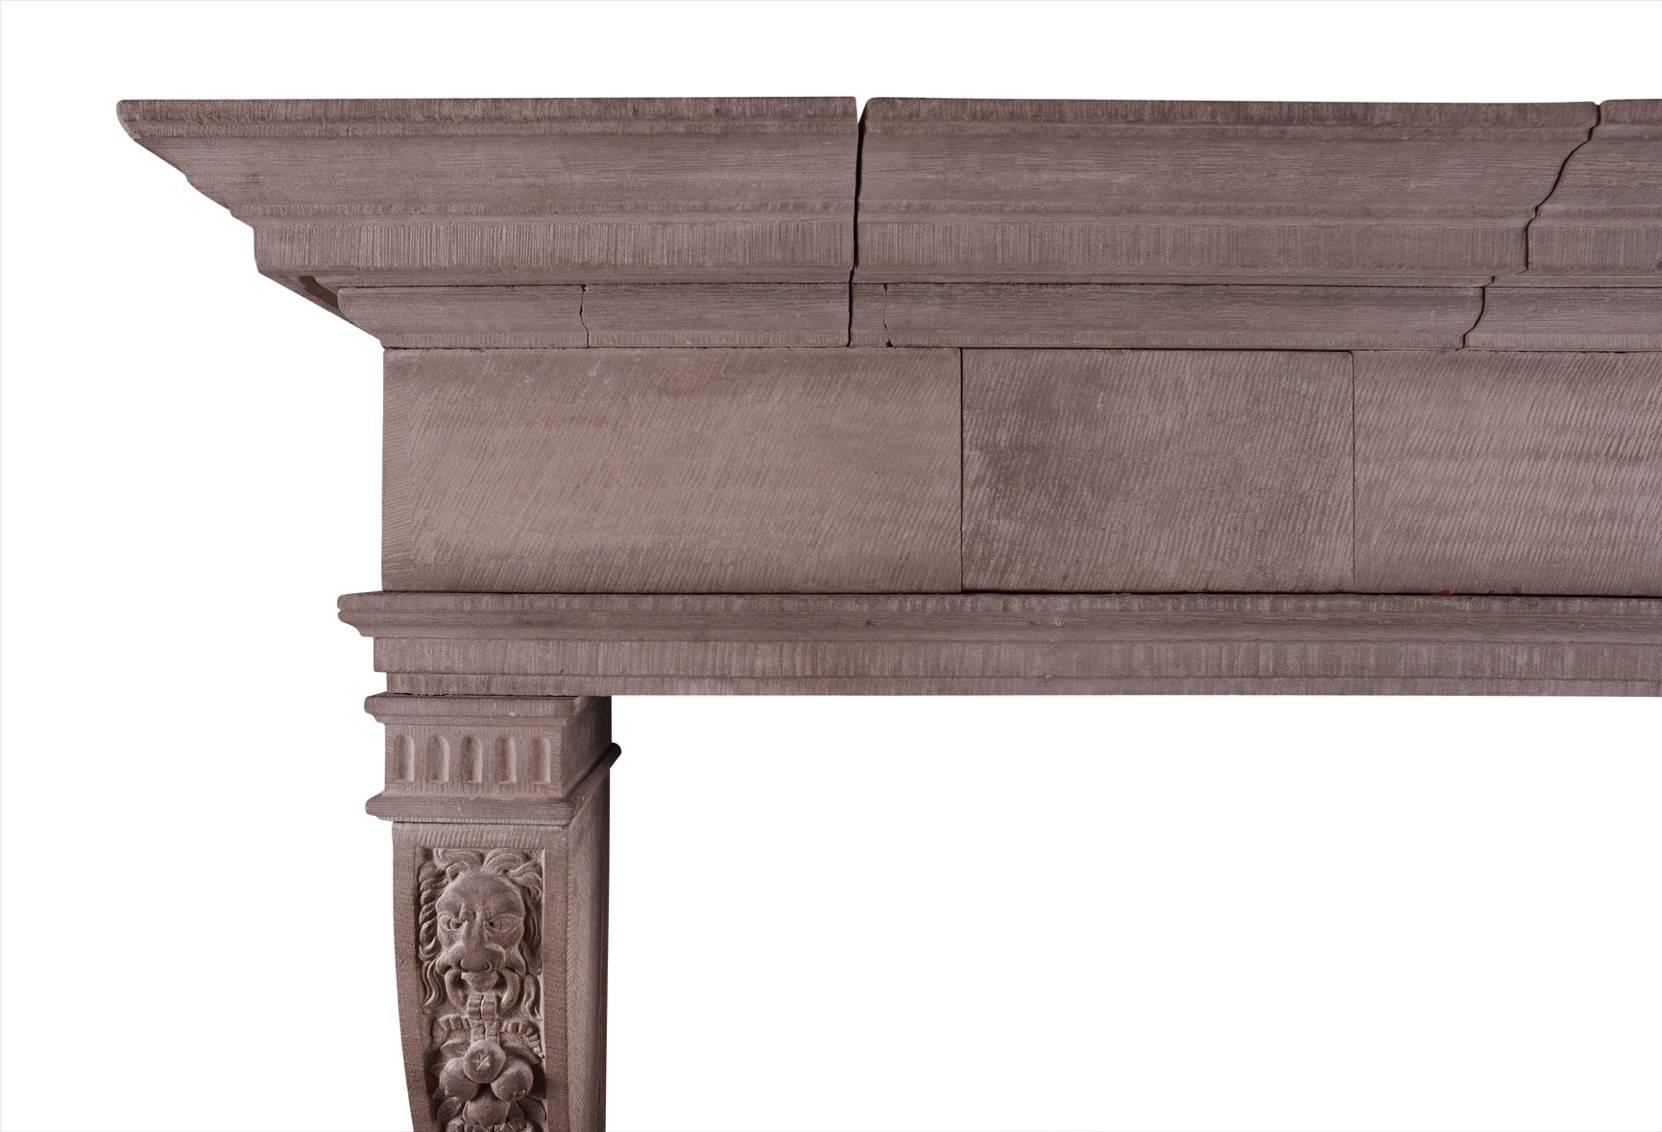 A large, rustic French limestone fireplace. The shaped jambs with carved fruit surmounted by tied ribbons and lion masks. Plain frieze with moulded shelf above. An impressive piece, circa 1900.

Measurements:
Shelf width: 1820 mm 71 5/8 in
Overall